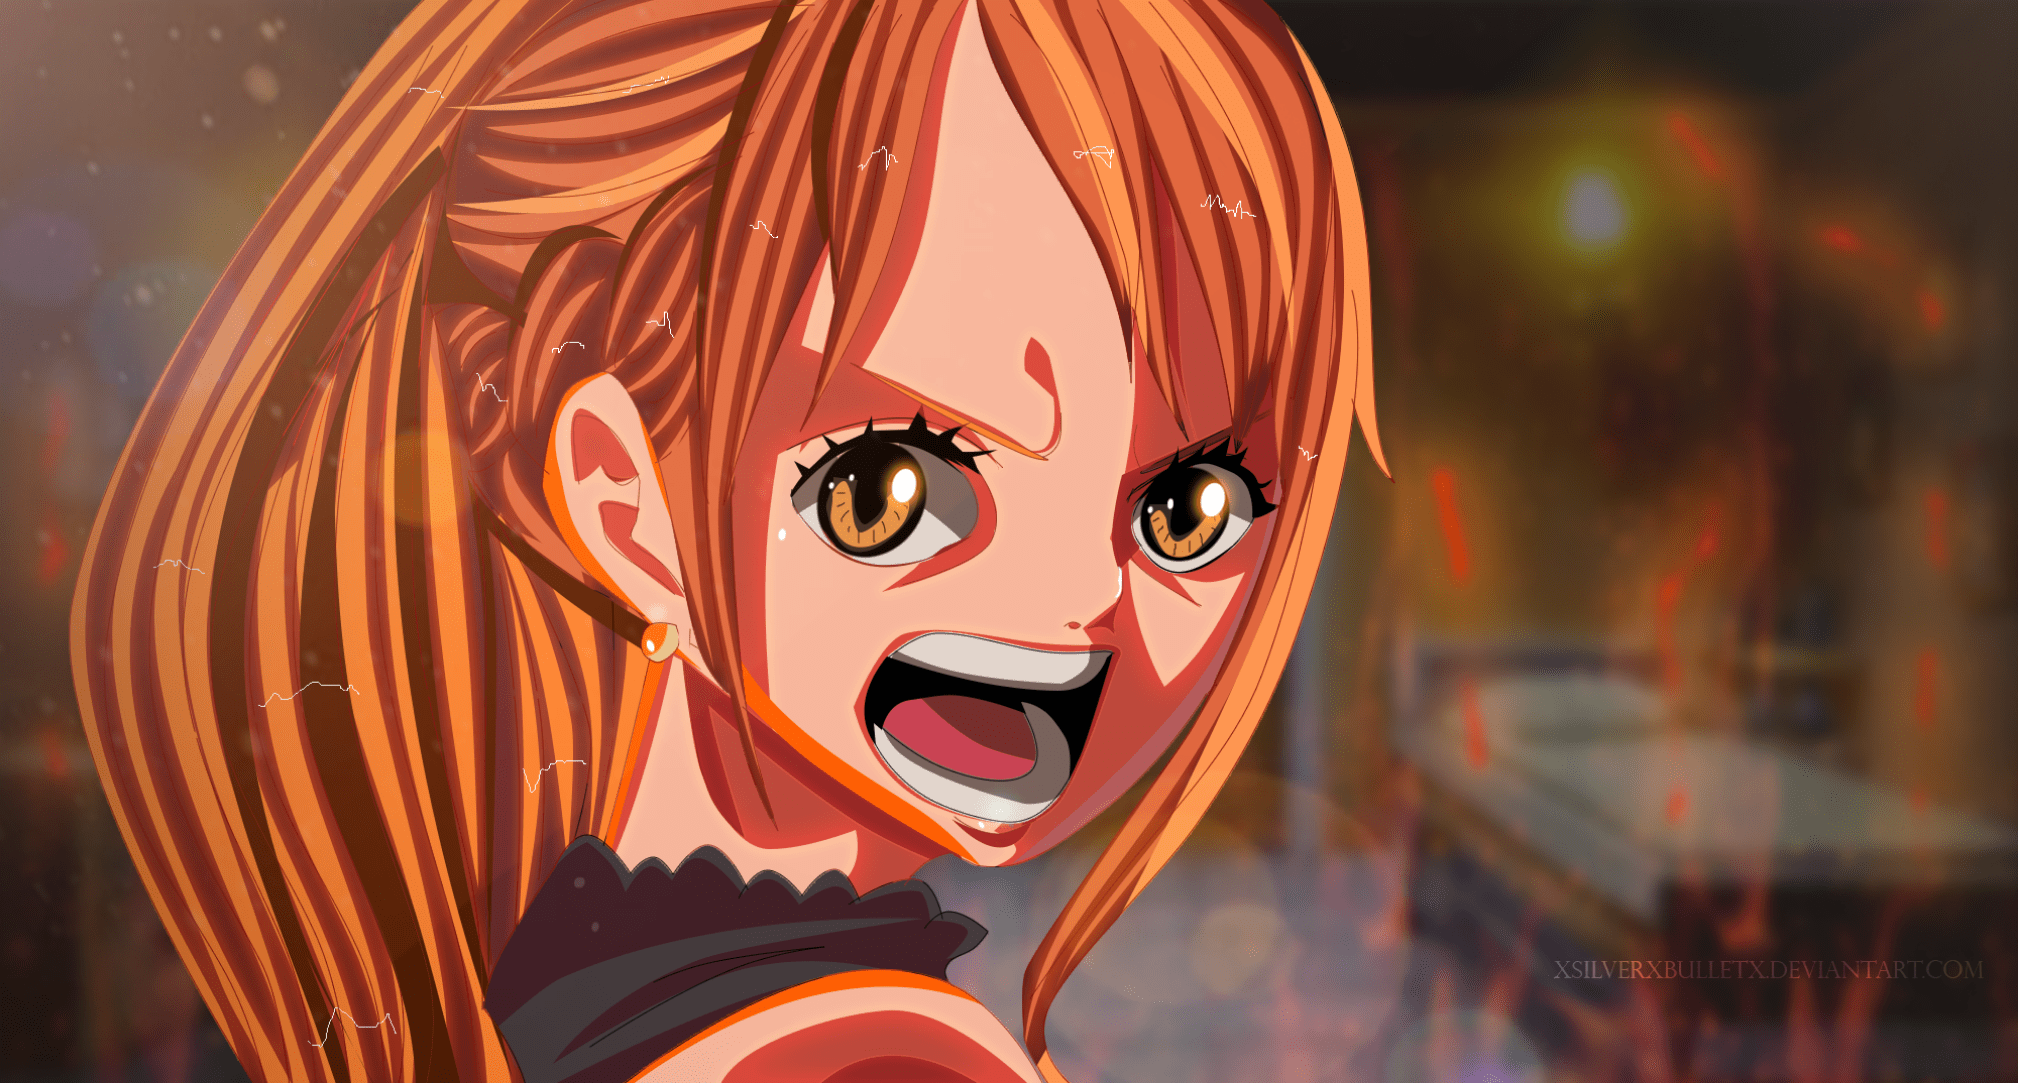 Nami One Piece Wallpapers - Top Free Nami One Piece Backgrounds